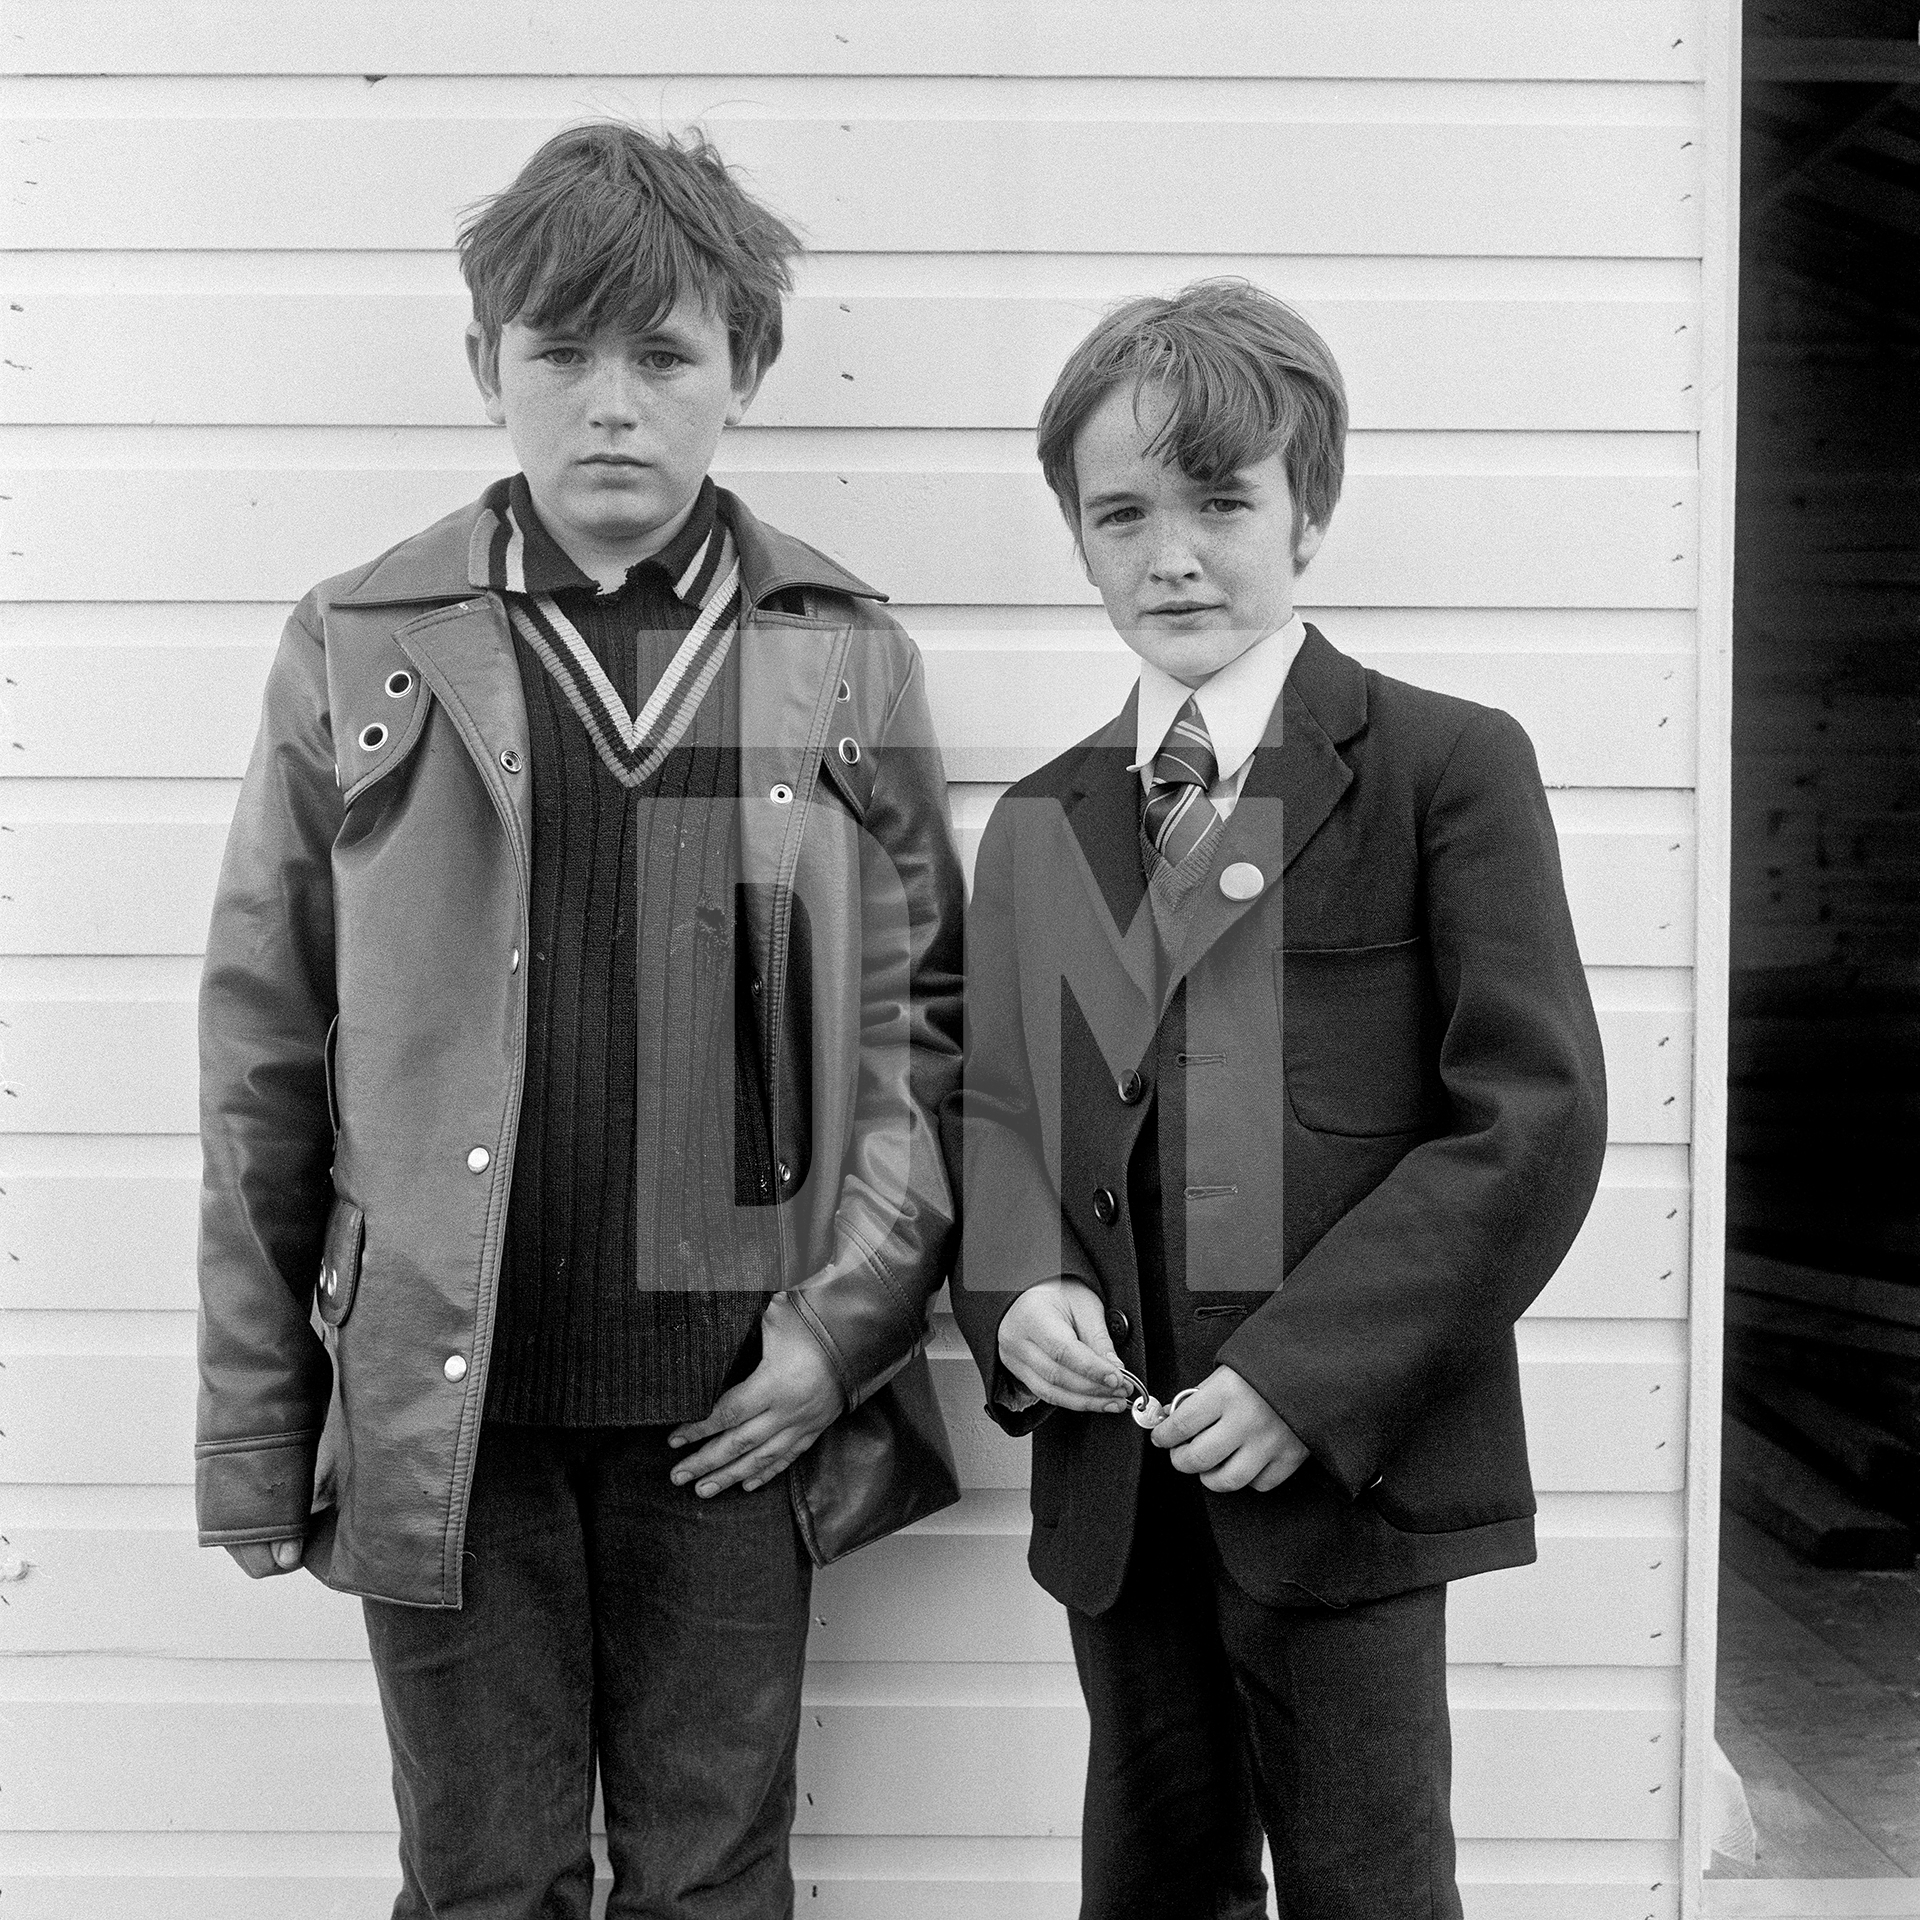 Identified as: the Weldrake brothers, left Steven, right Anthony, Hartlepool, Cleveland. September 1974 by Daniel Meadows